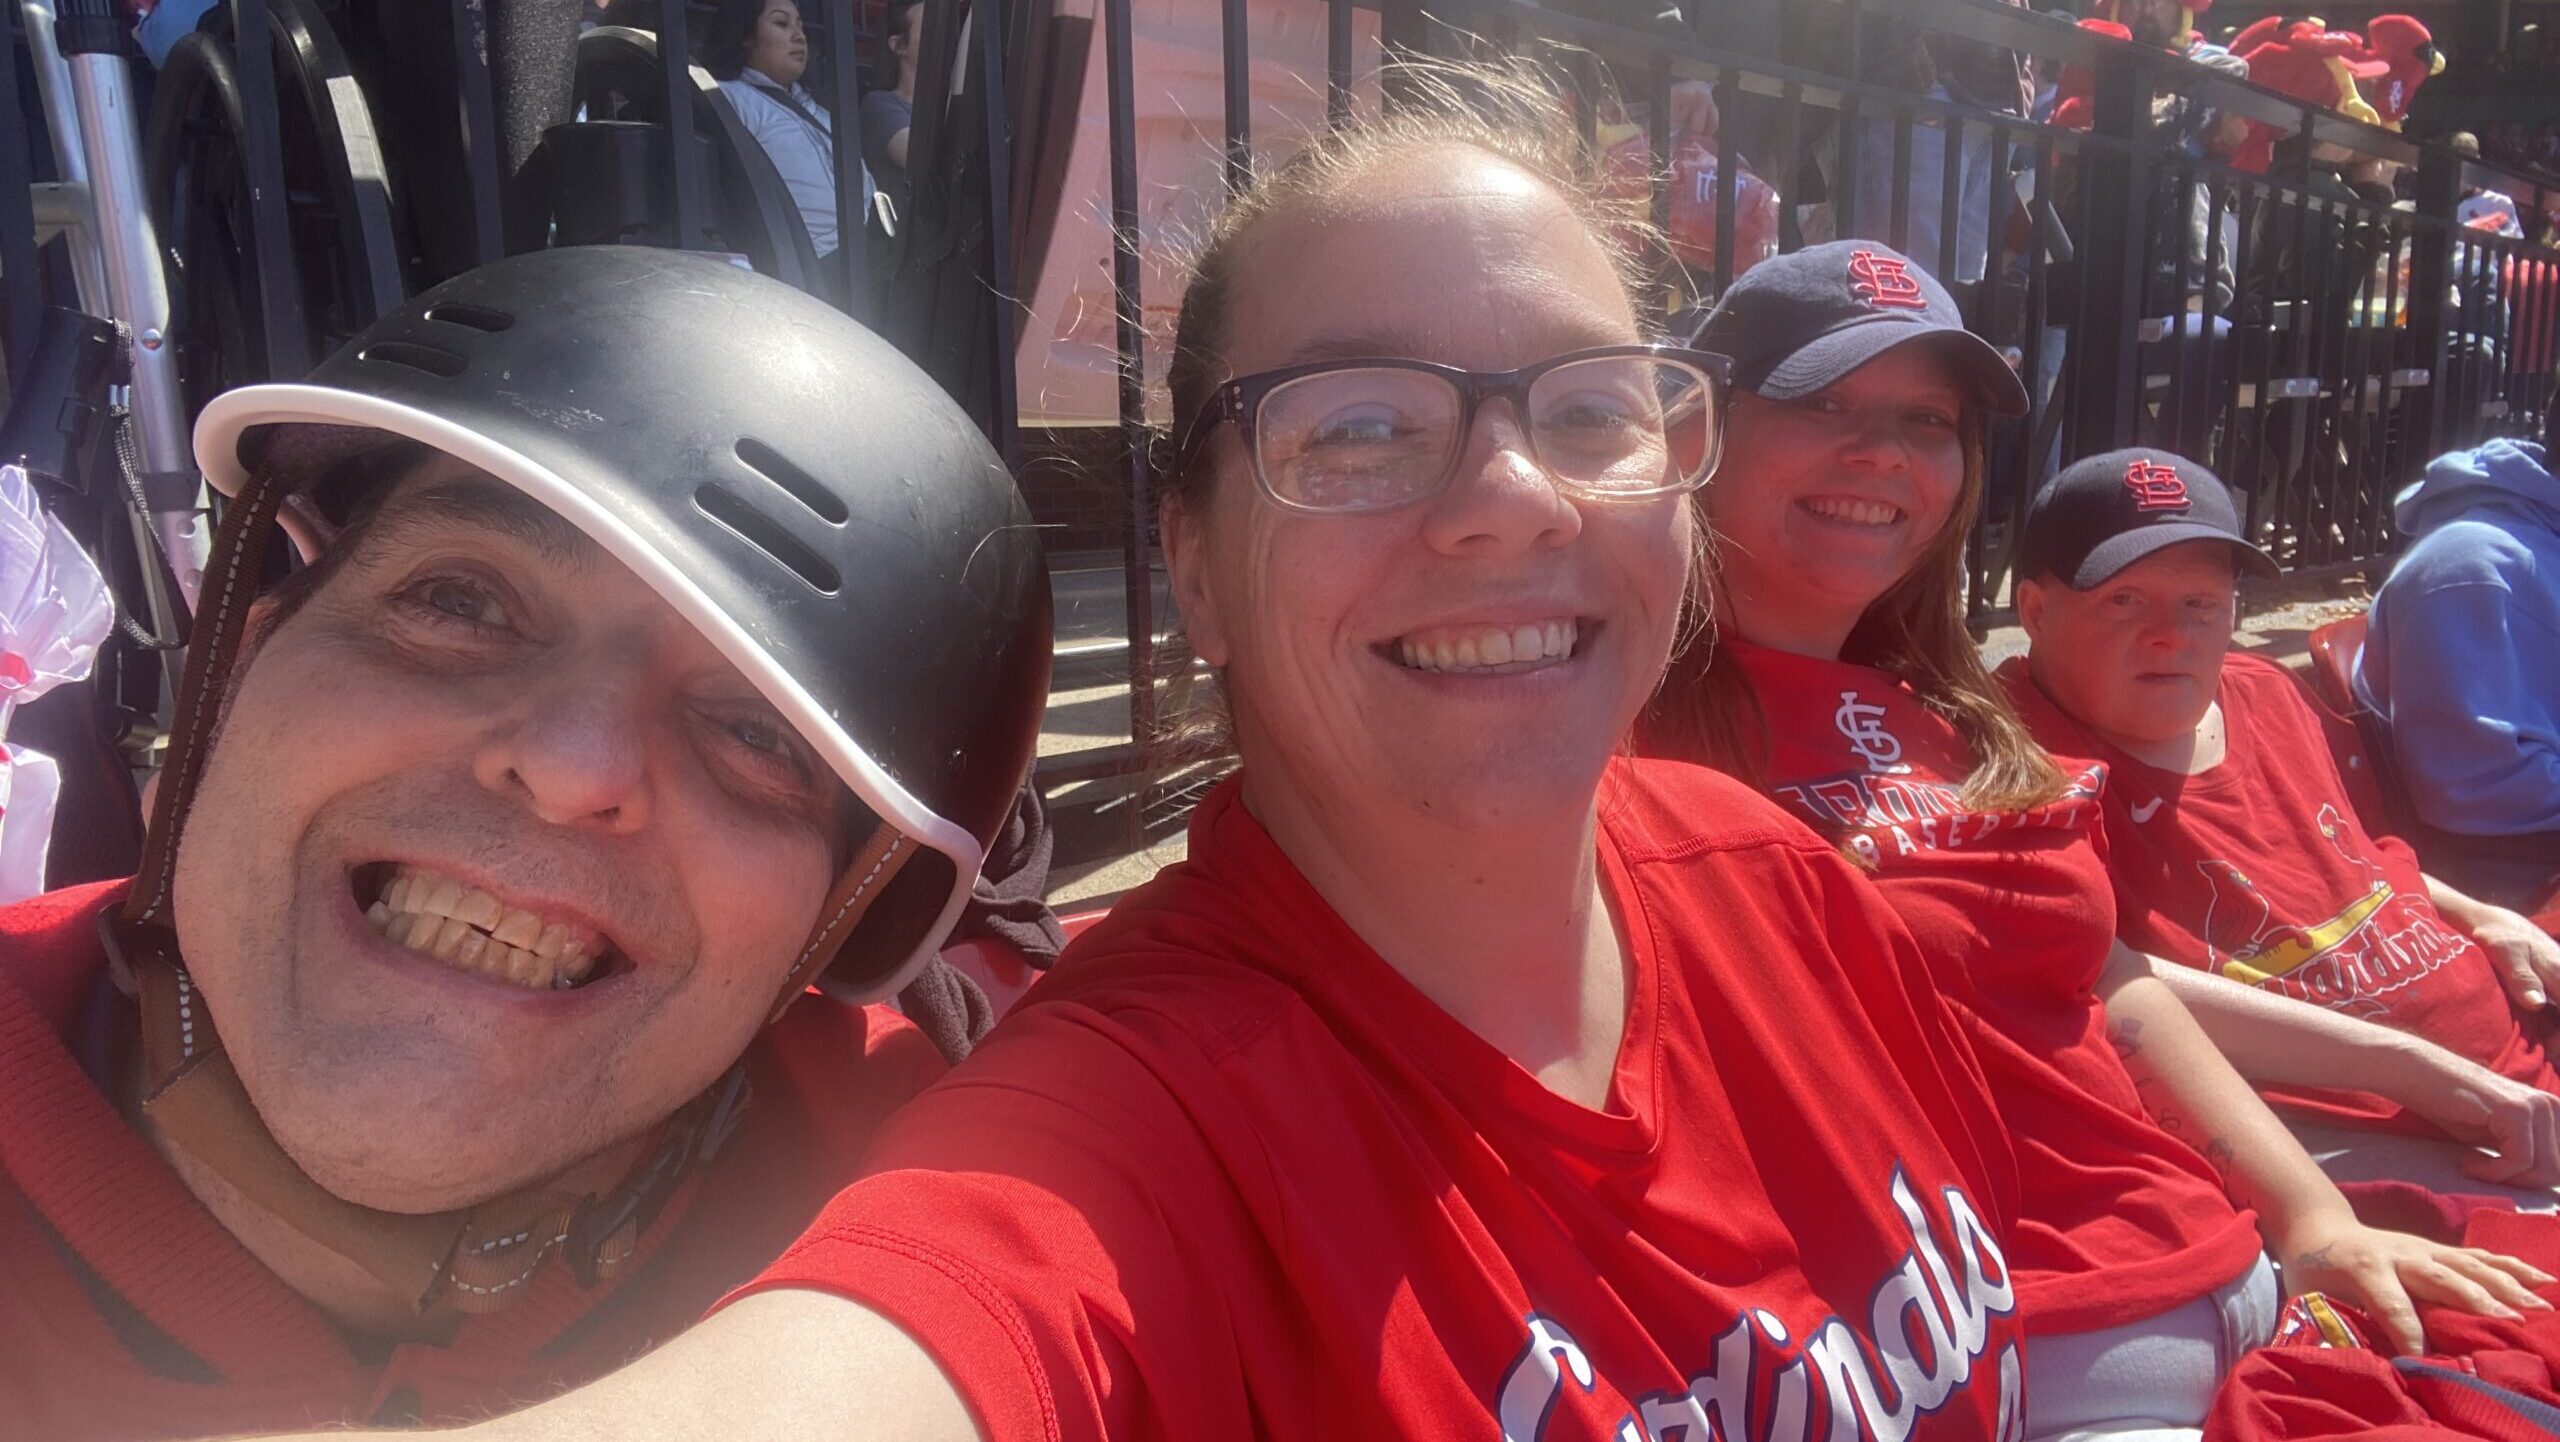 Four Emmaus Clients and DSPs in red Cardinals attire smile and enjoy a sunny day at a baseball game; one is wearing a helmet